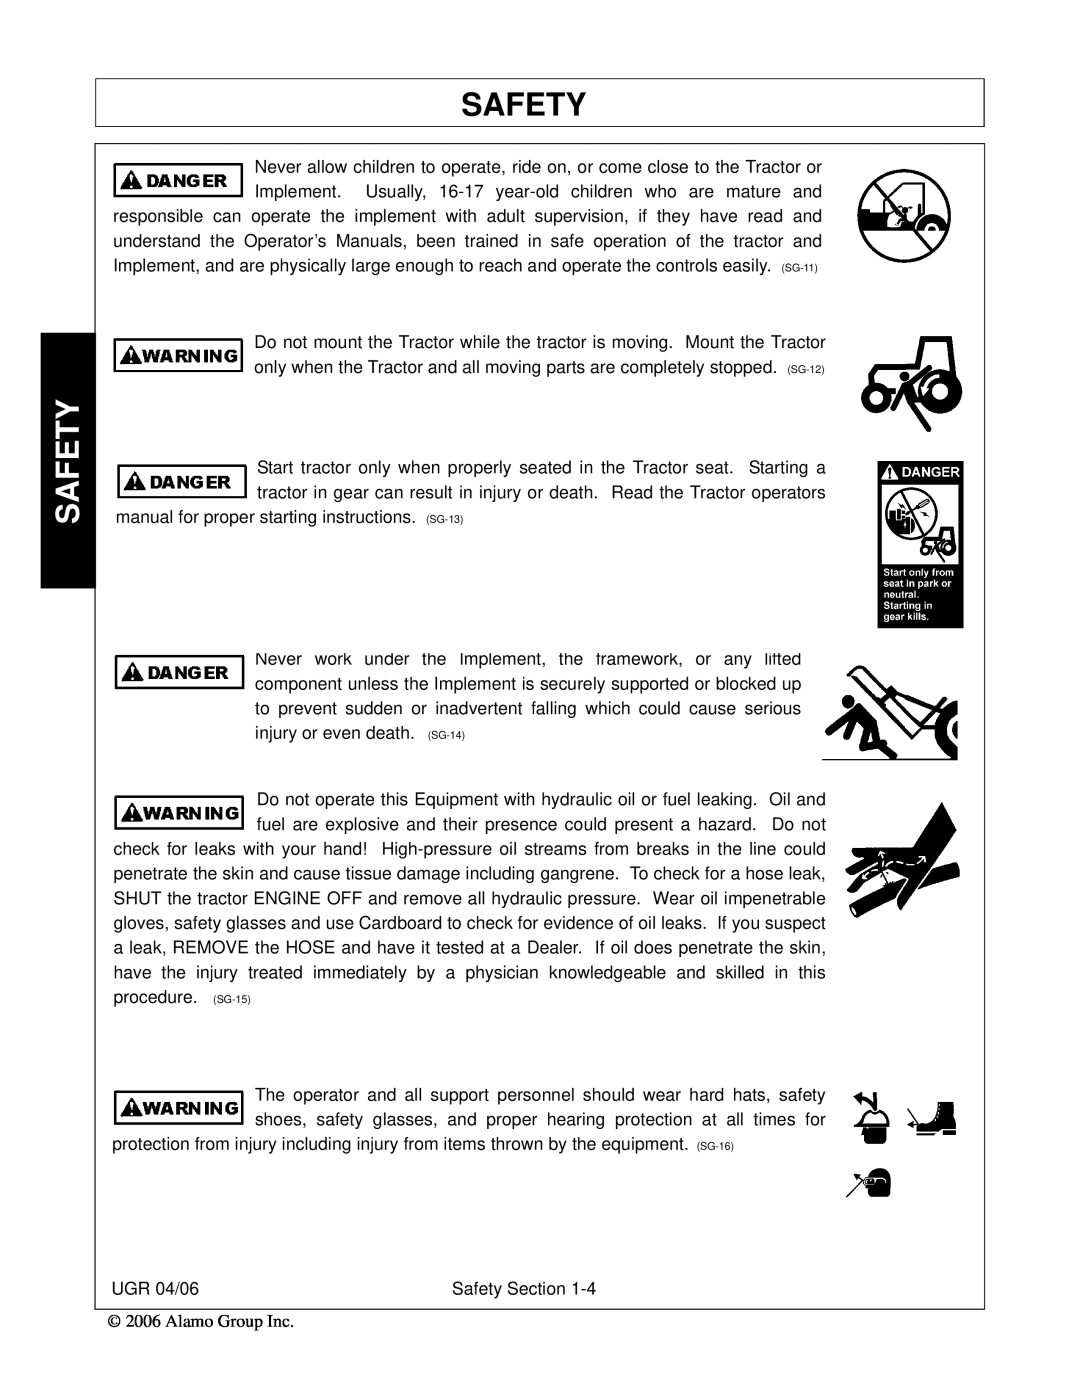 Alamo 02979718C Safety, manual for proper starting instructions 